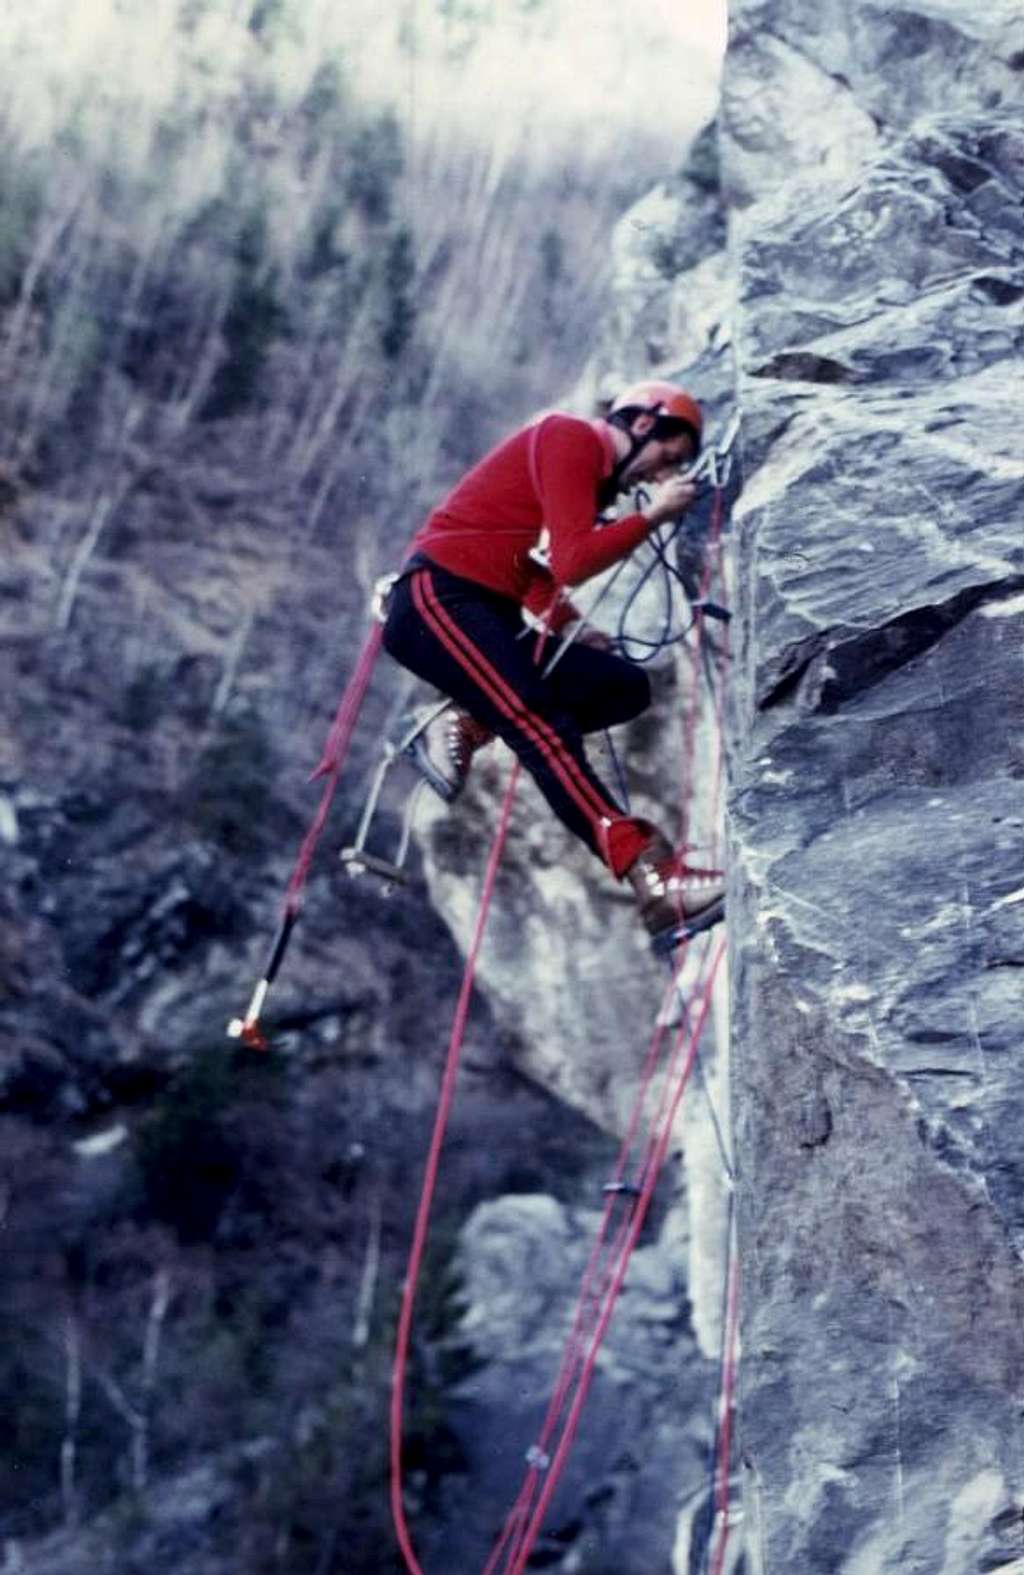 Old Climbings (An old way of climb)/3 Almost Out 1978